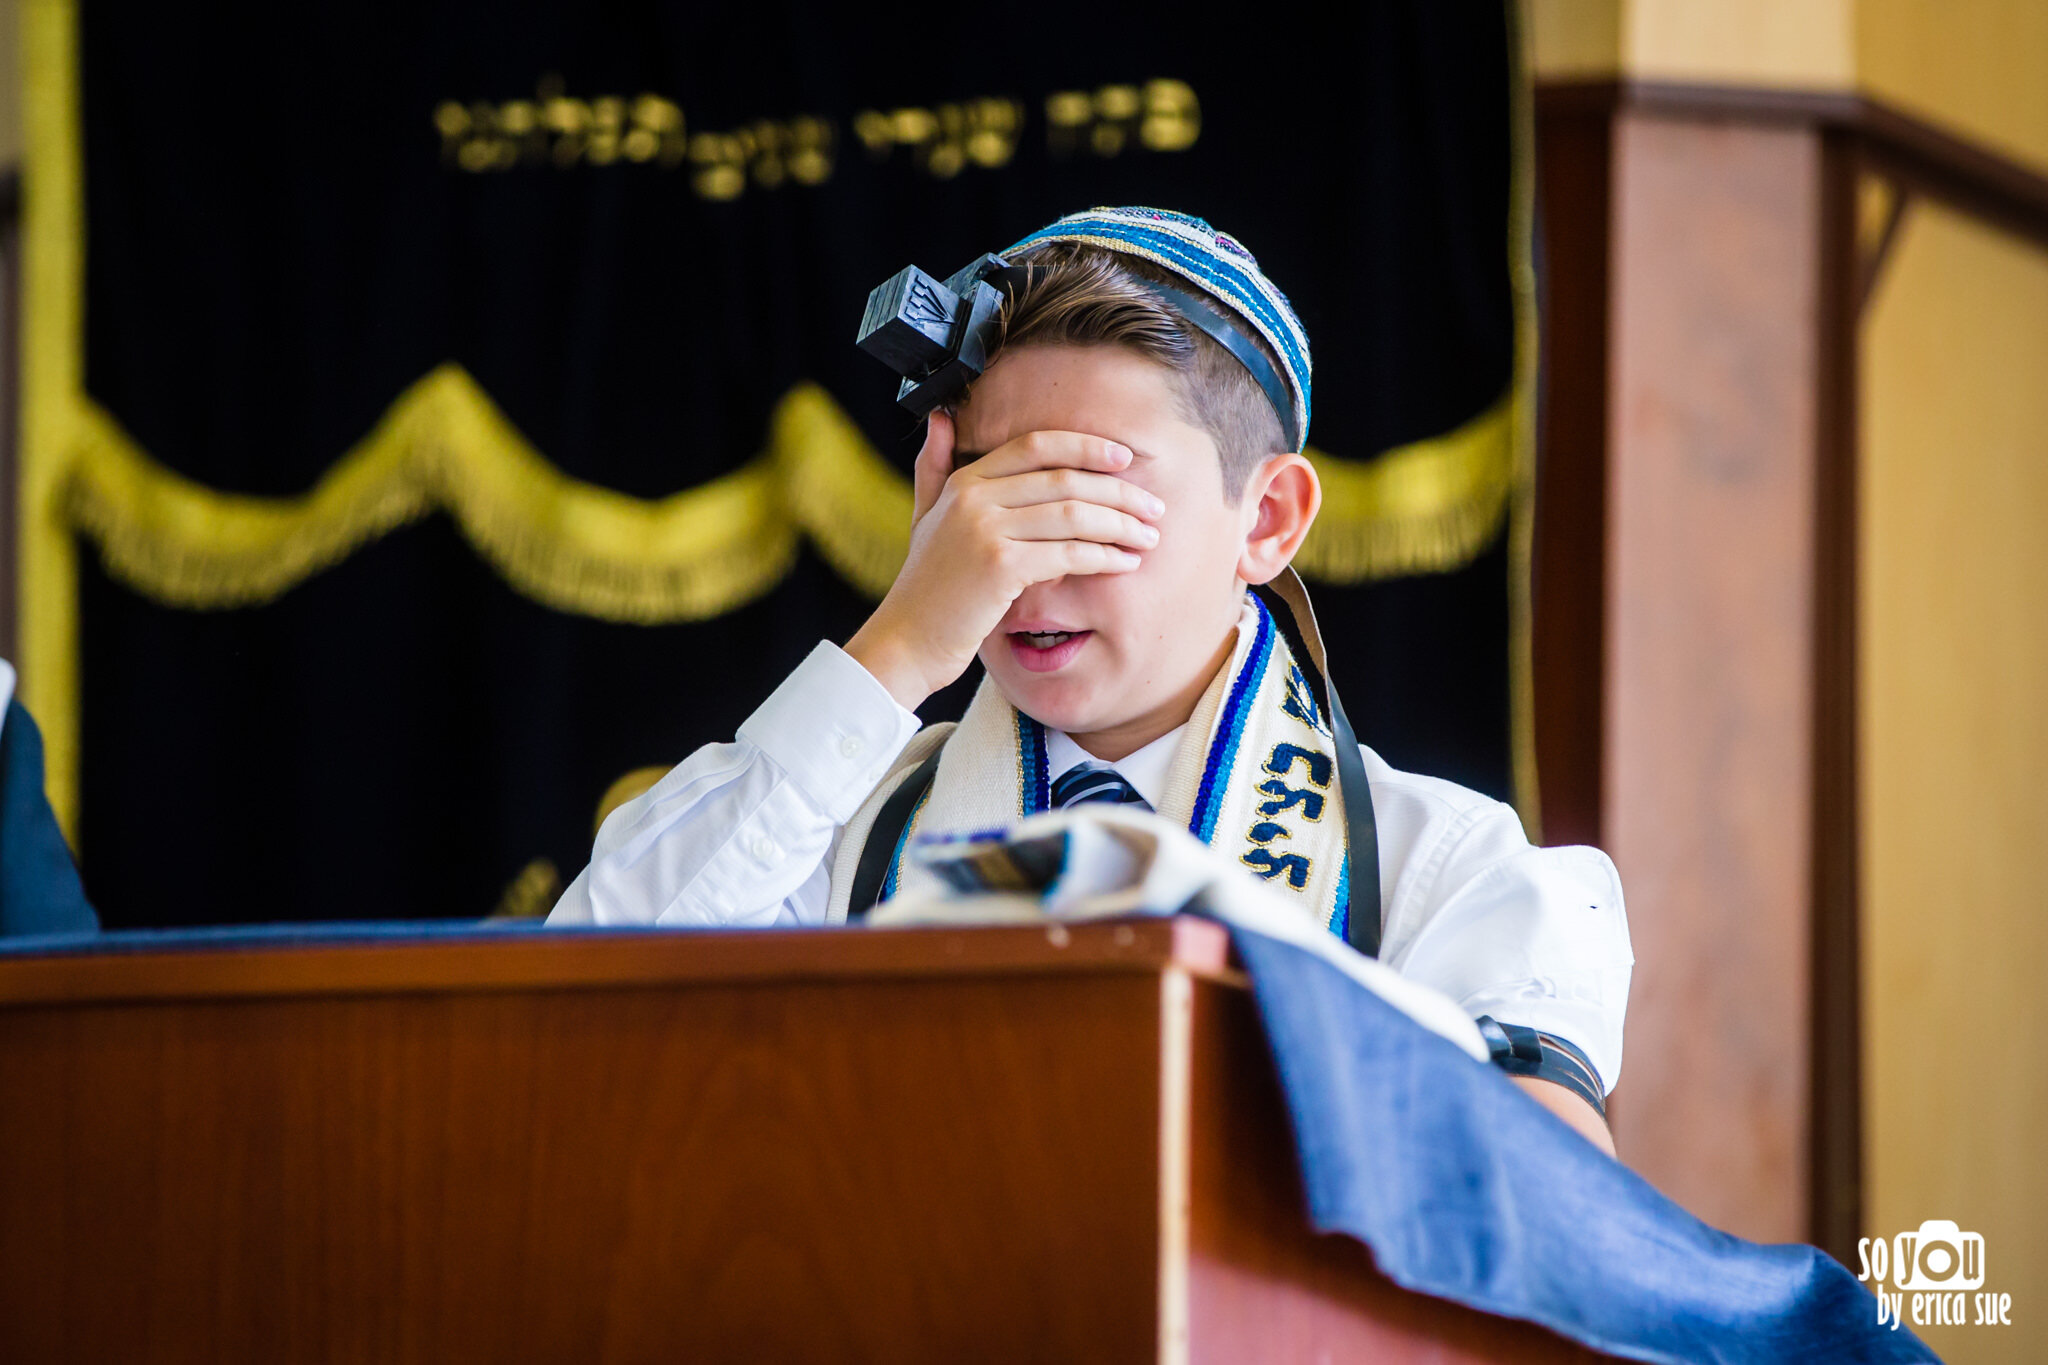 10-so-you-by-erica-sue-chabad-parkland-bar-mitzvah-photographer-9354.JPG